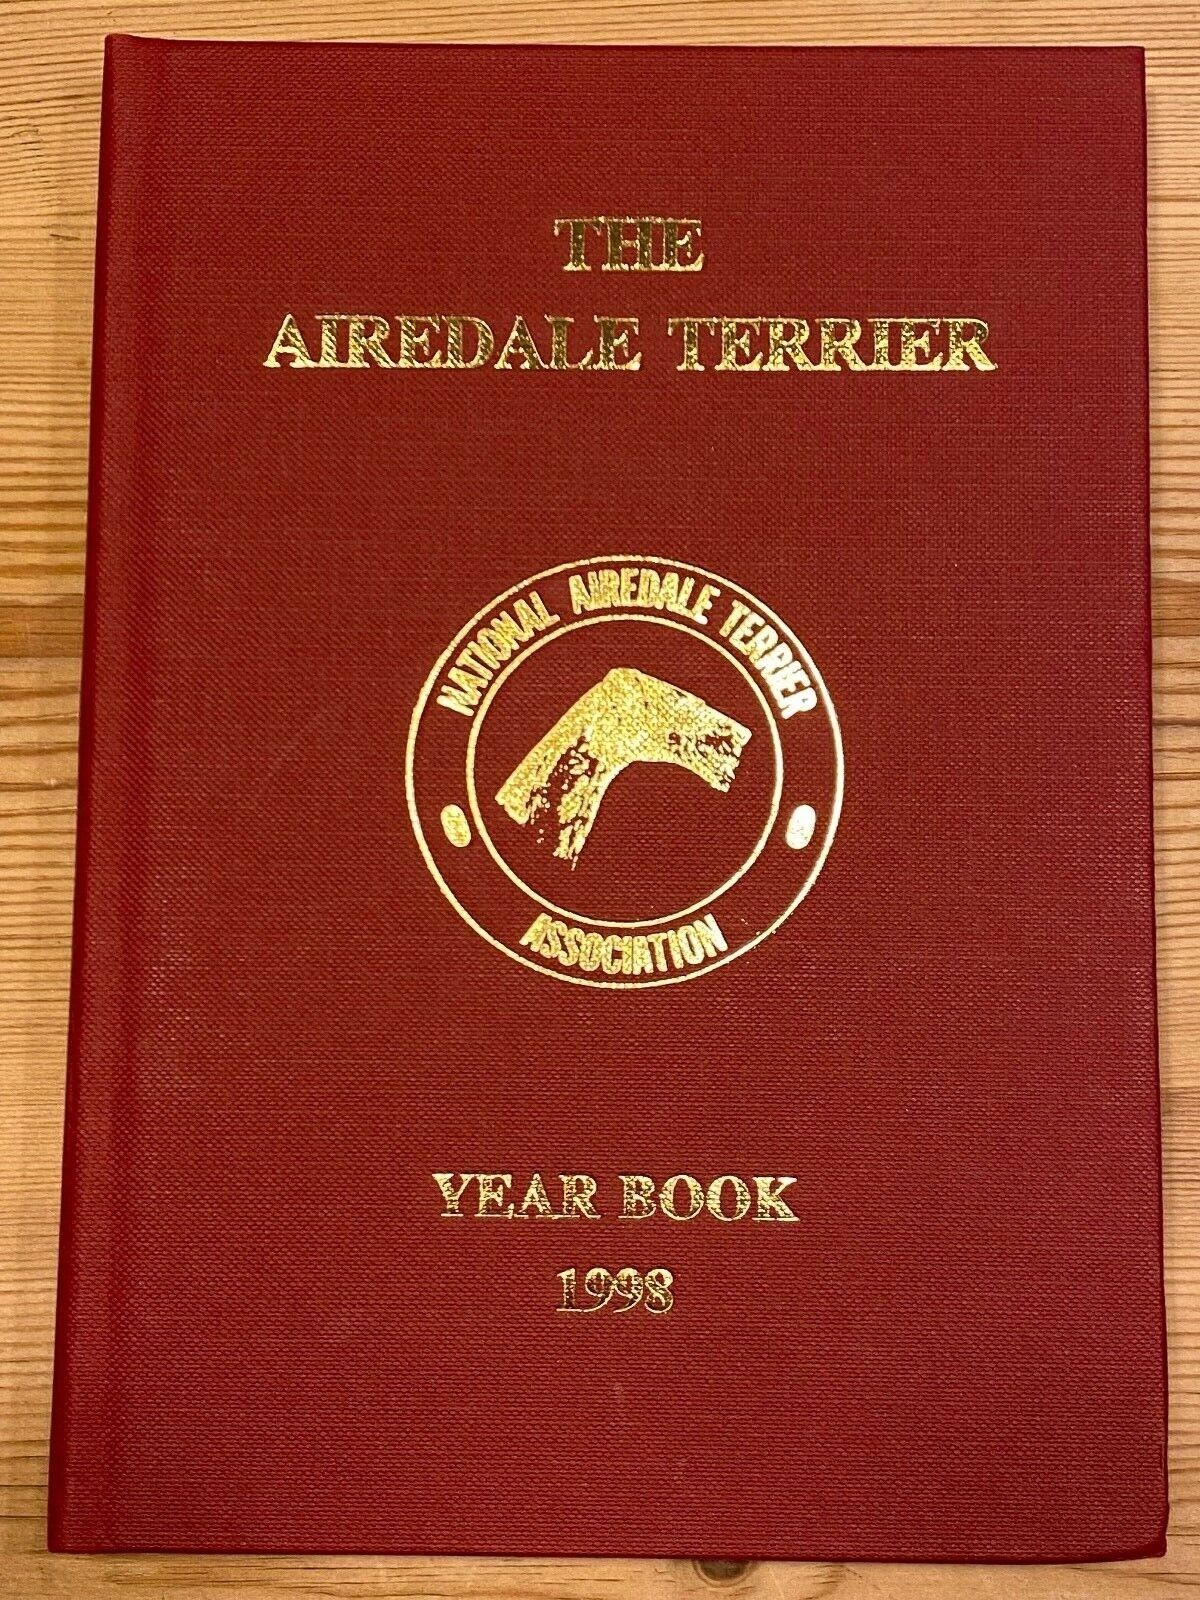 Rare The Airedale Terrier Yearbook 1998" Dog Book By Nata 1st 1999